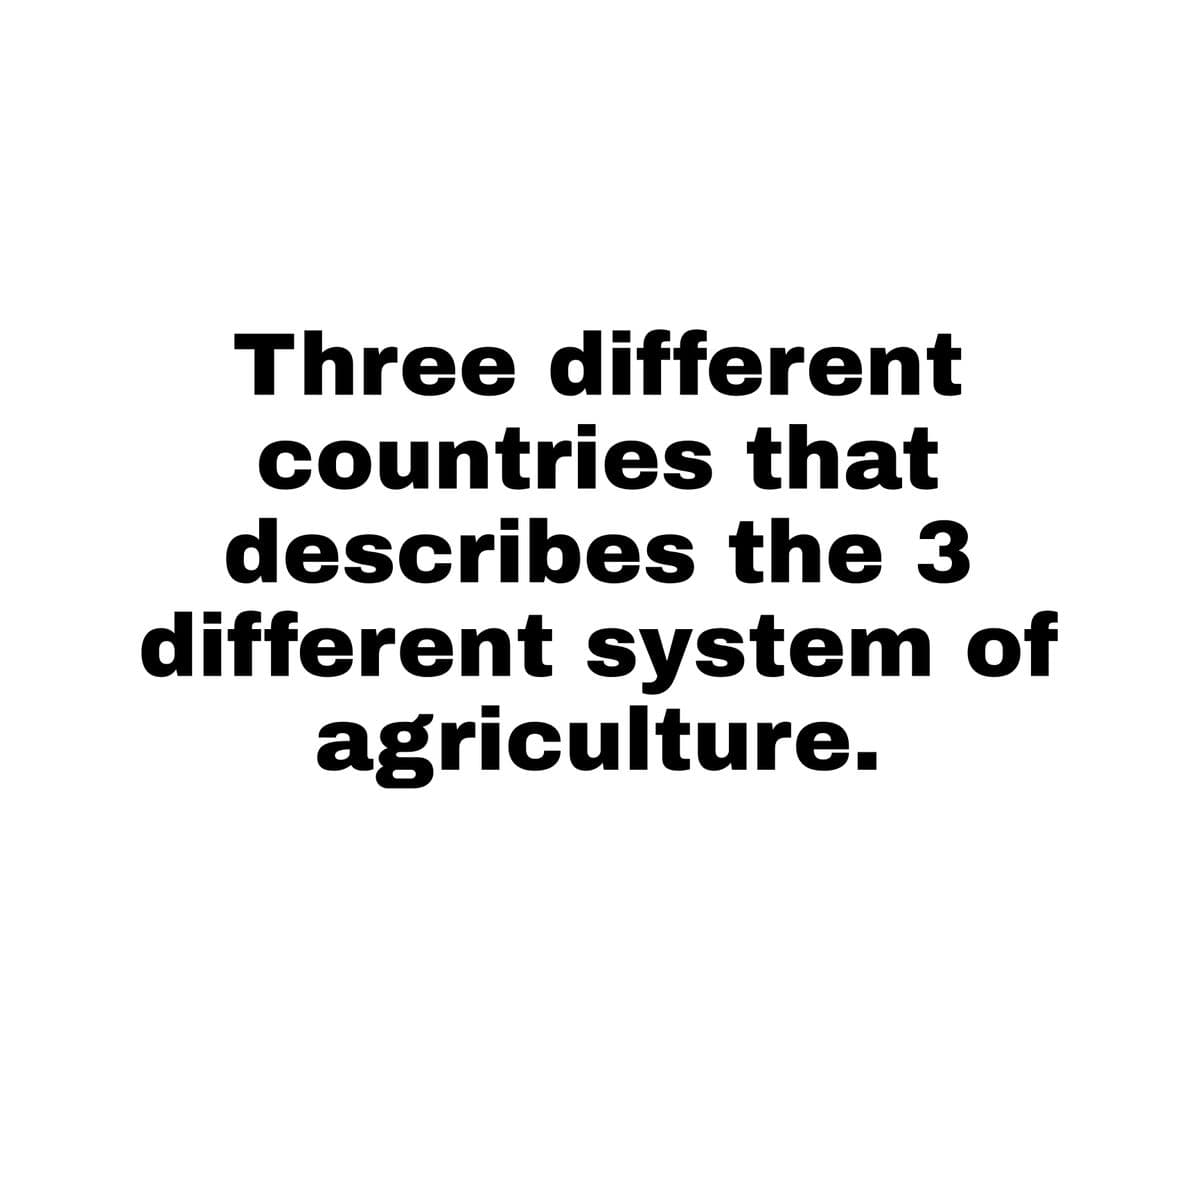 Three different
countries that
describes the 3
different system of
agriculture.
Cour
